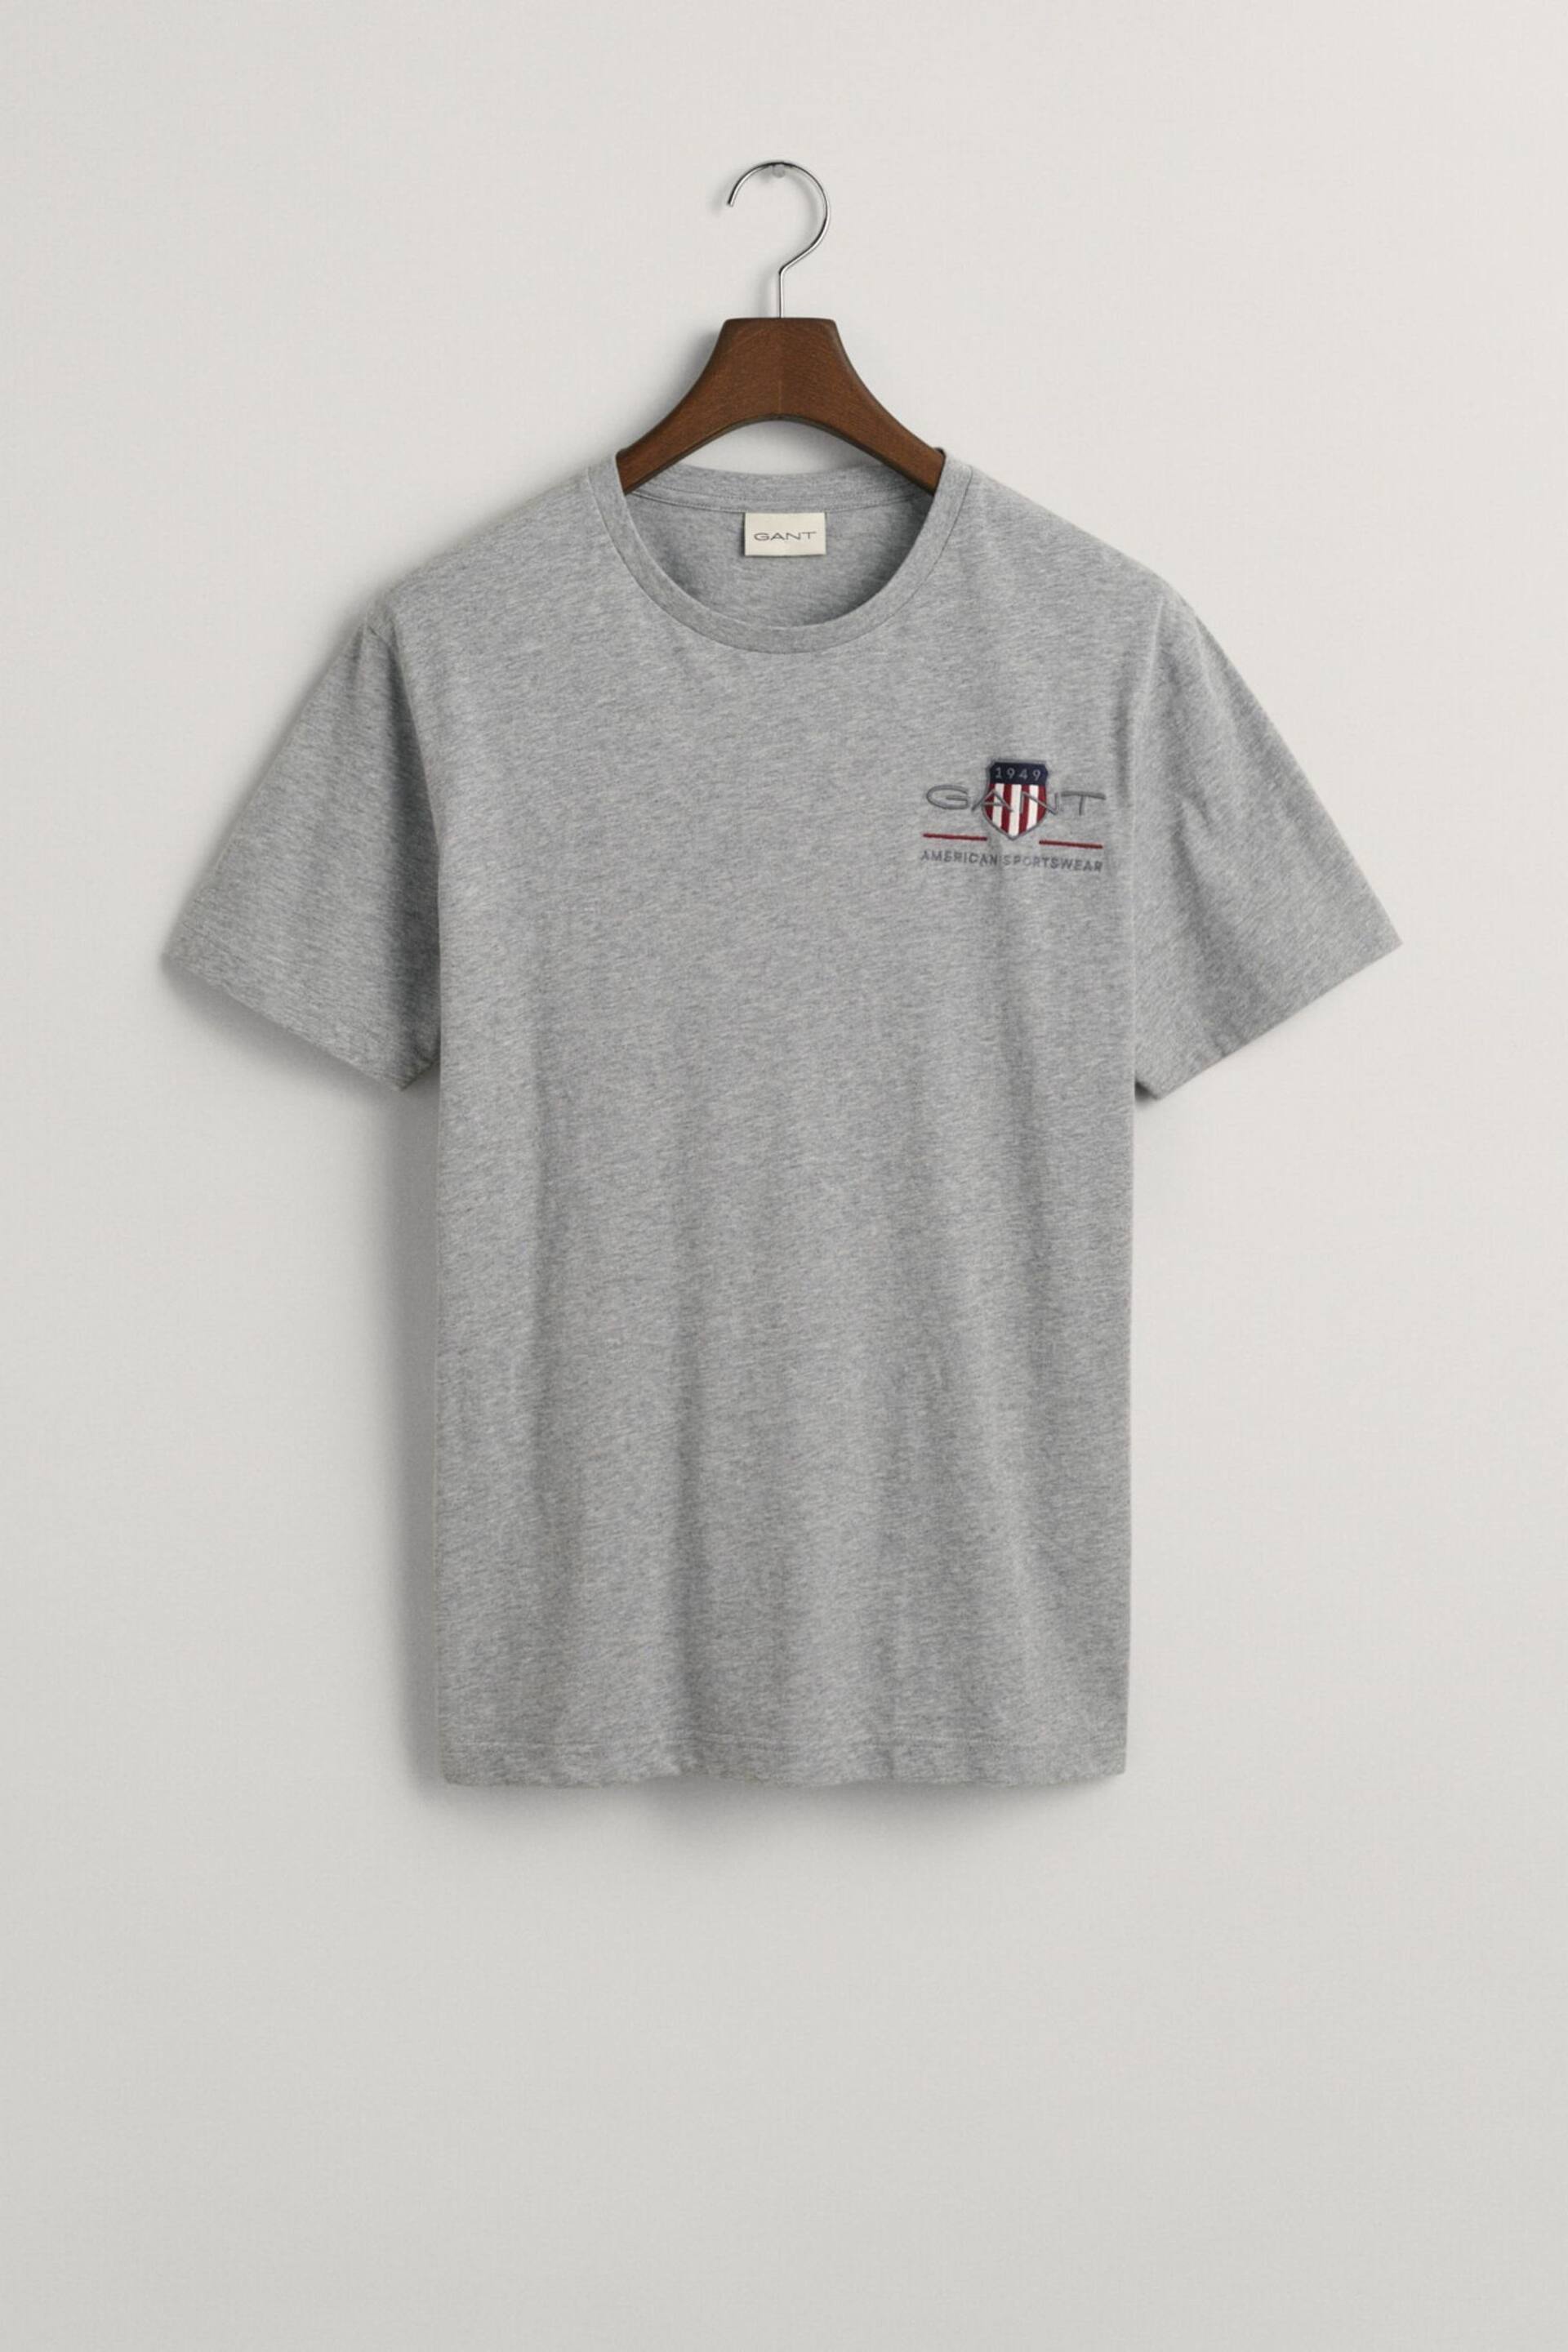 GANT Embroidered Archive Shield T-Shirt - Image 4 of 5